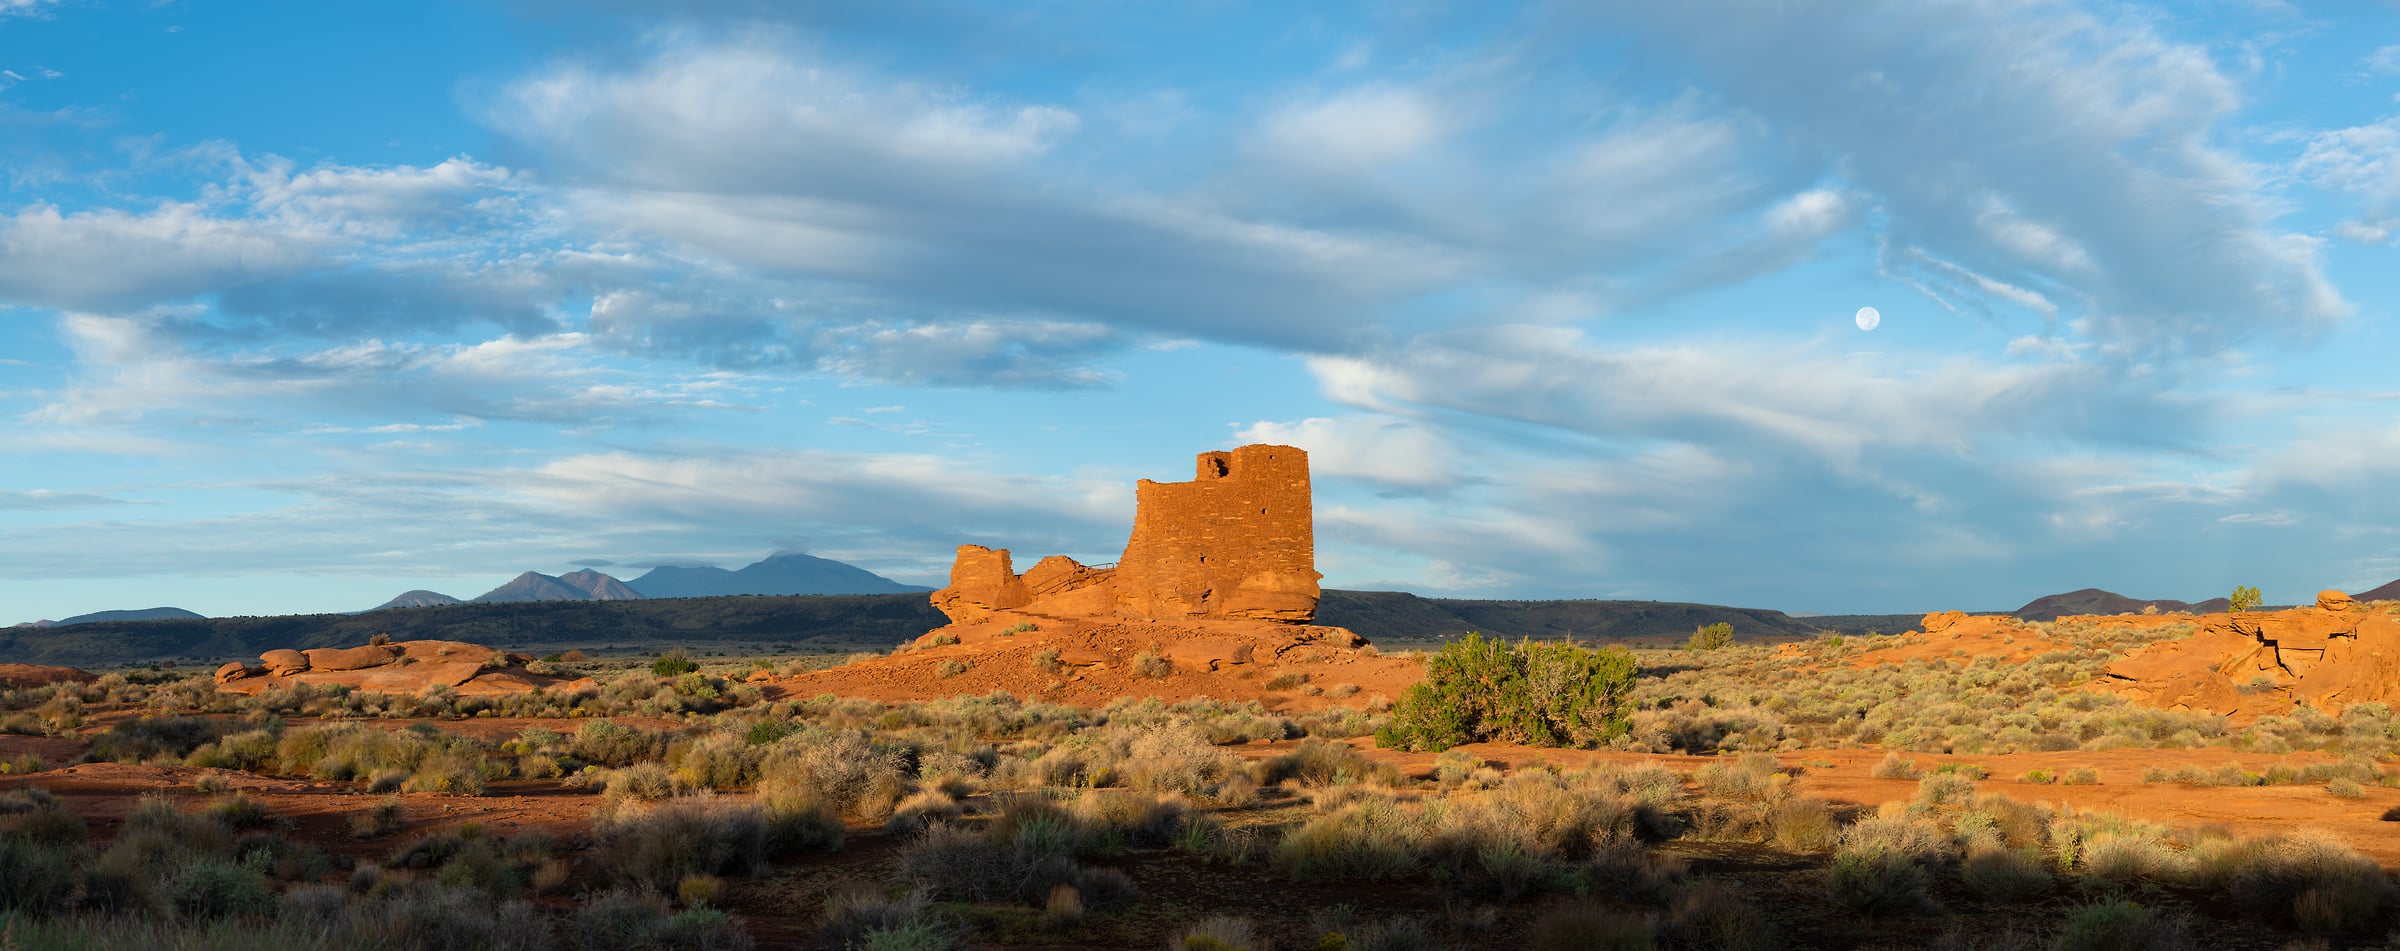 379 megapixels! A very high resolution, large-format VAST photo print of Wukoki Pueblo, an American archeology site; landscape photograph created by Greg Probst in Wupatki National Monument, Arizona.